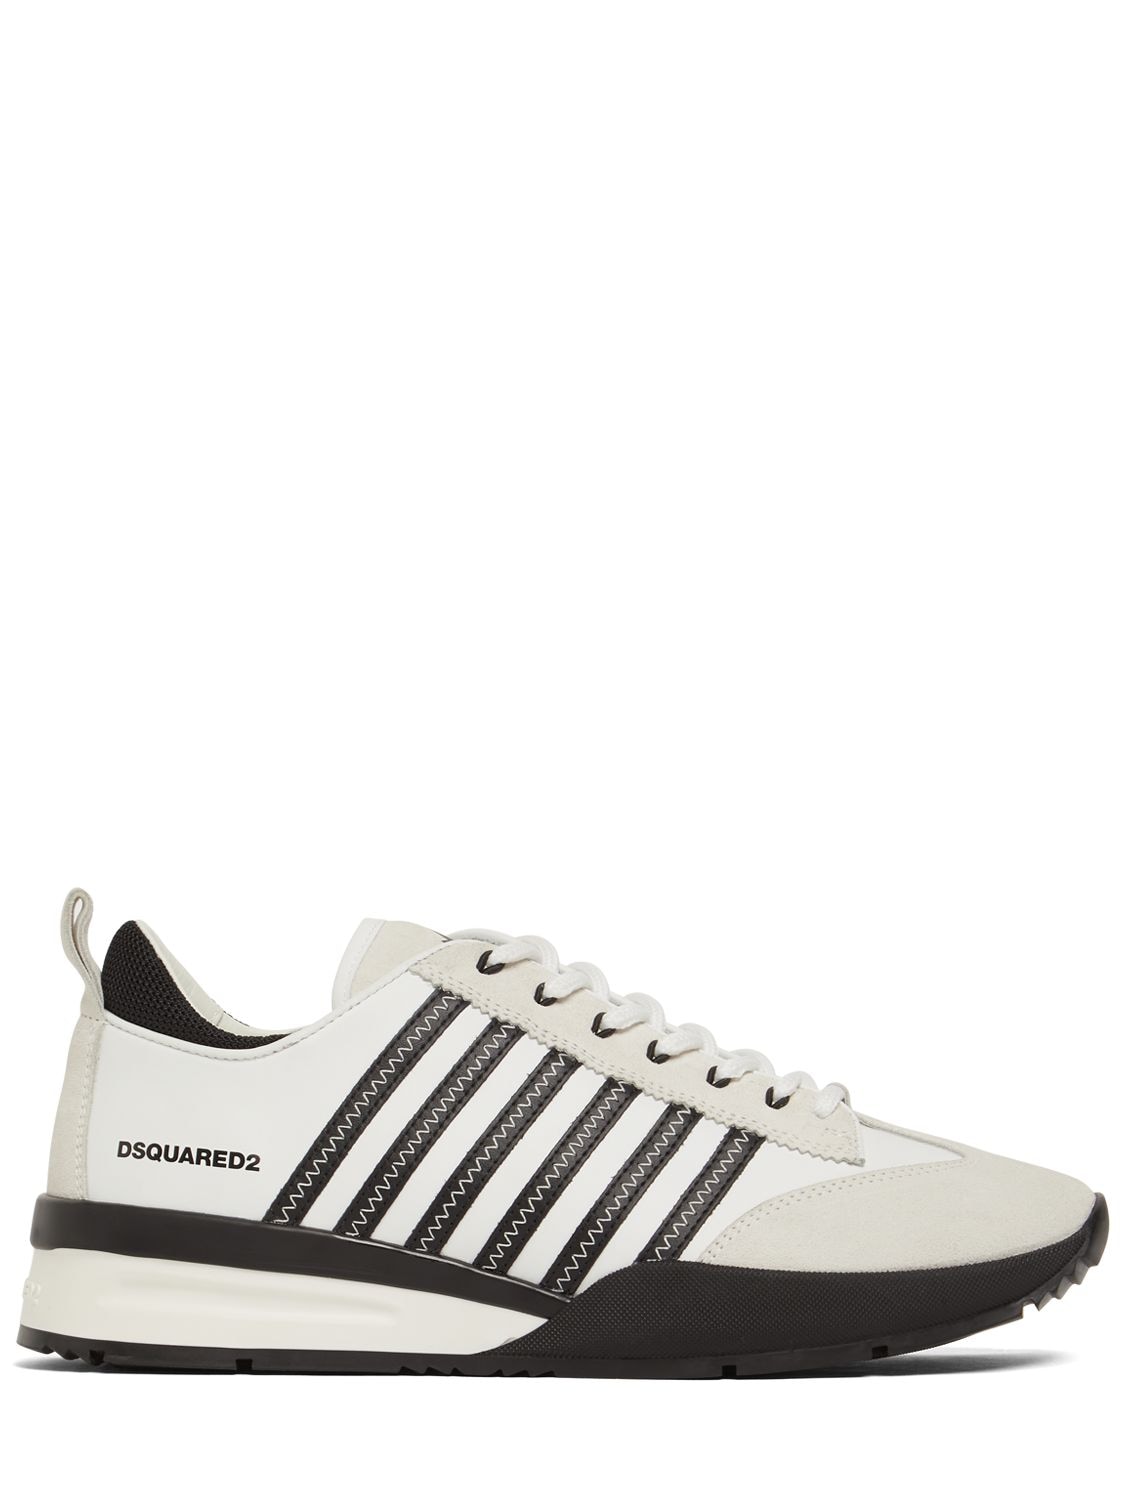 Dsquared2 Legend 251 Mix Leather Low Top Sneakers In White,black